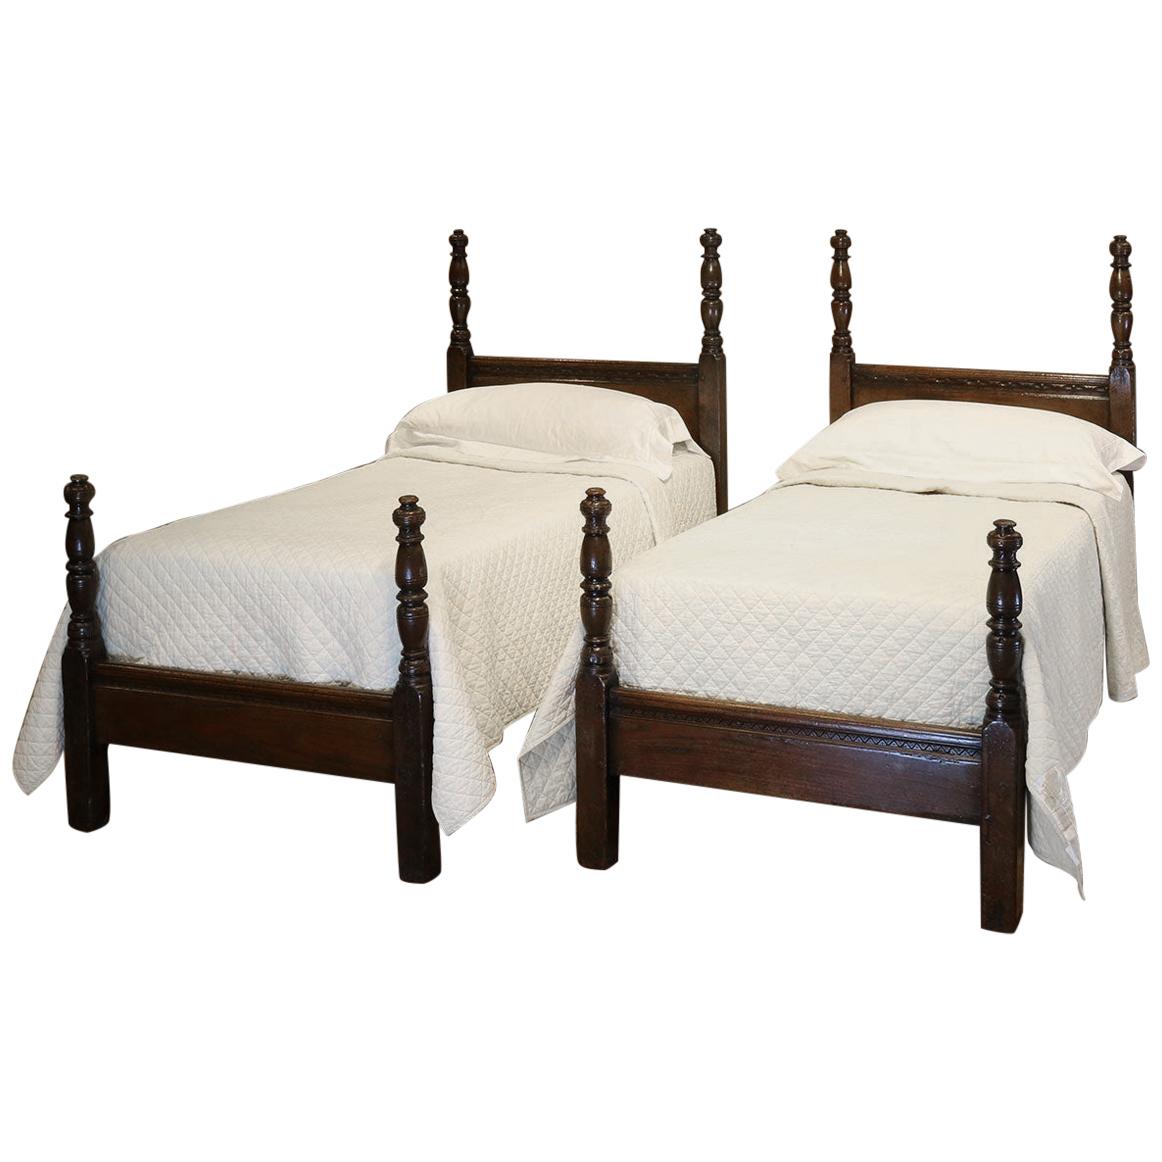 Matching Pair of Beds WP26